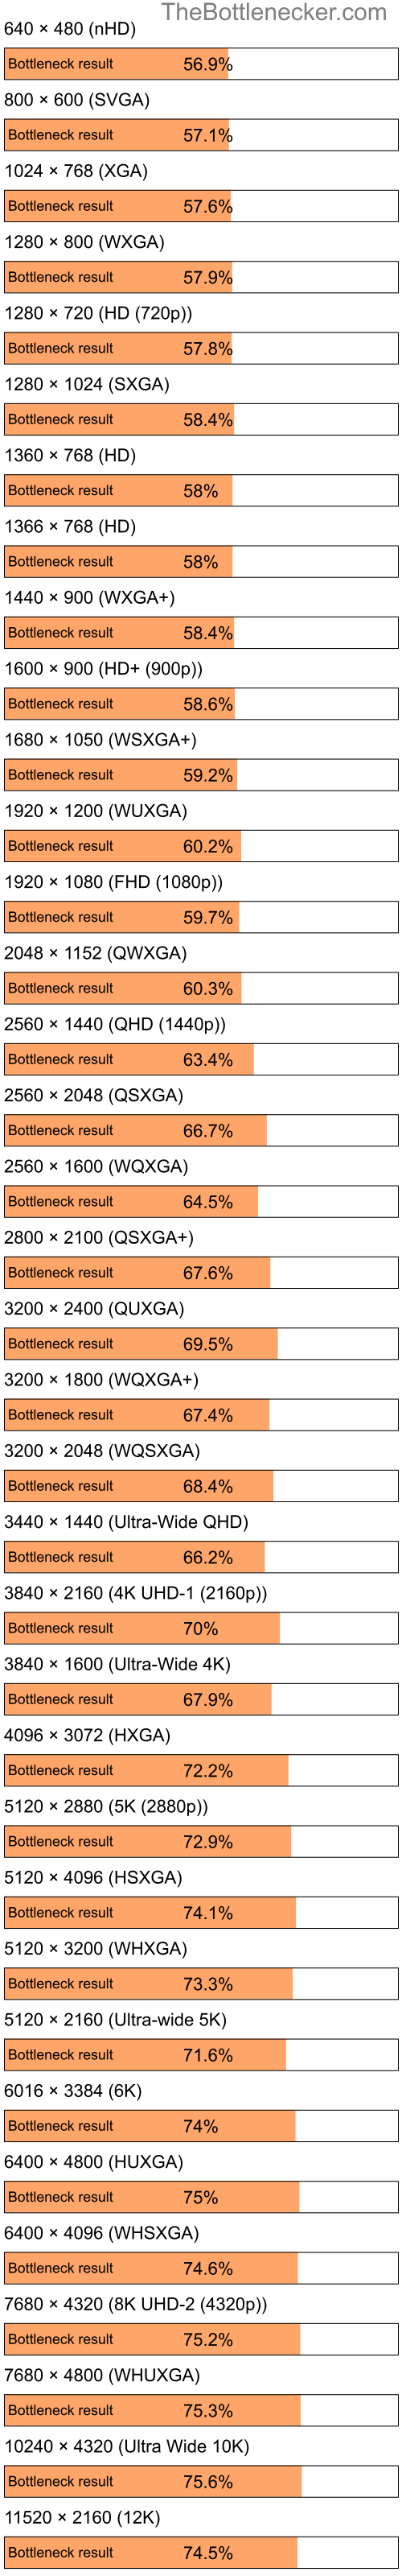 Bottleneck results by resolution for Intel Pentium 4 and AMD Mobility Radeon HD 3450 in Processor Intense Tasks